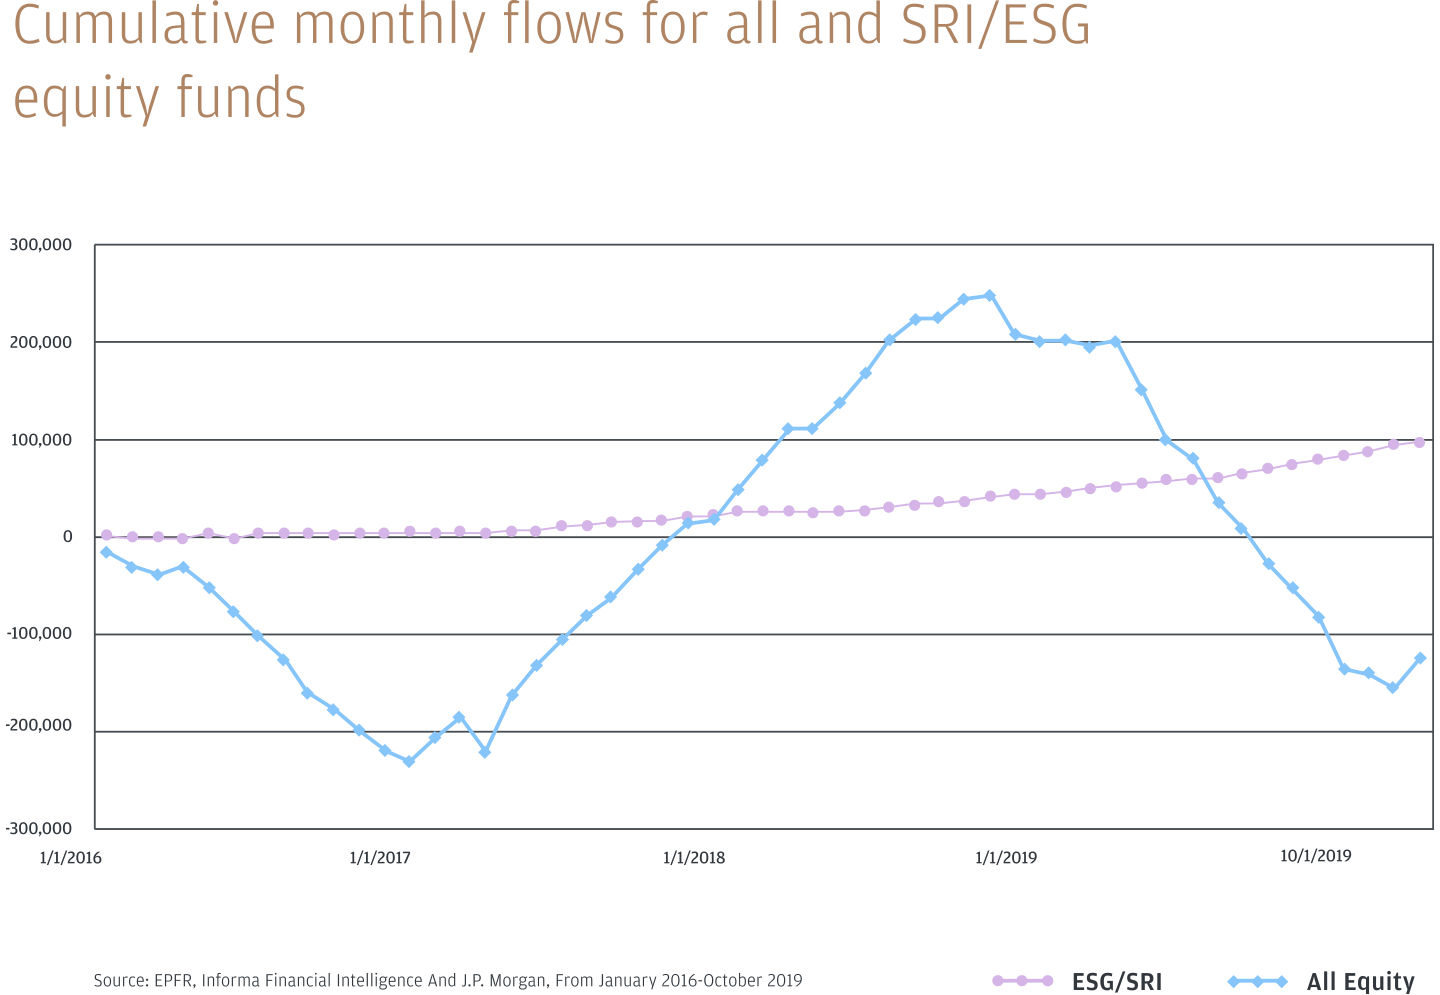 Infographic describes the cumulative monthly flows for all SRI/ESG equity funds.